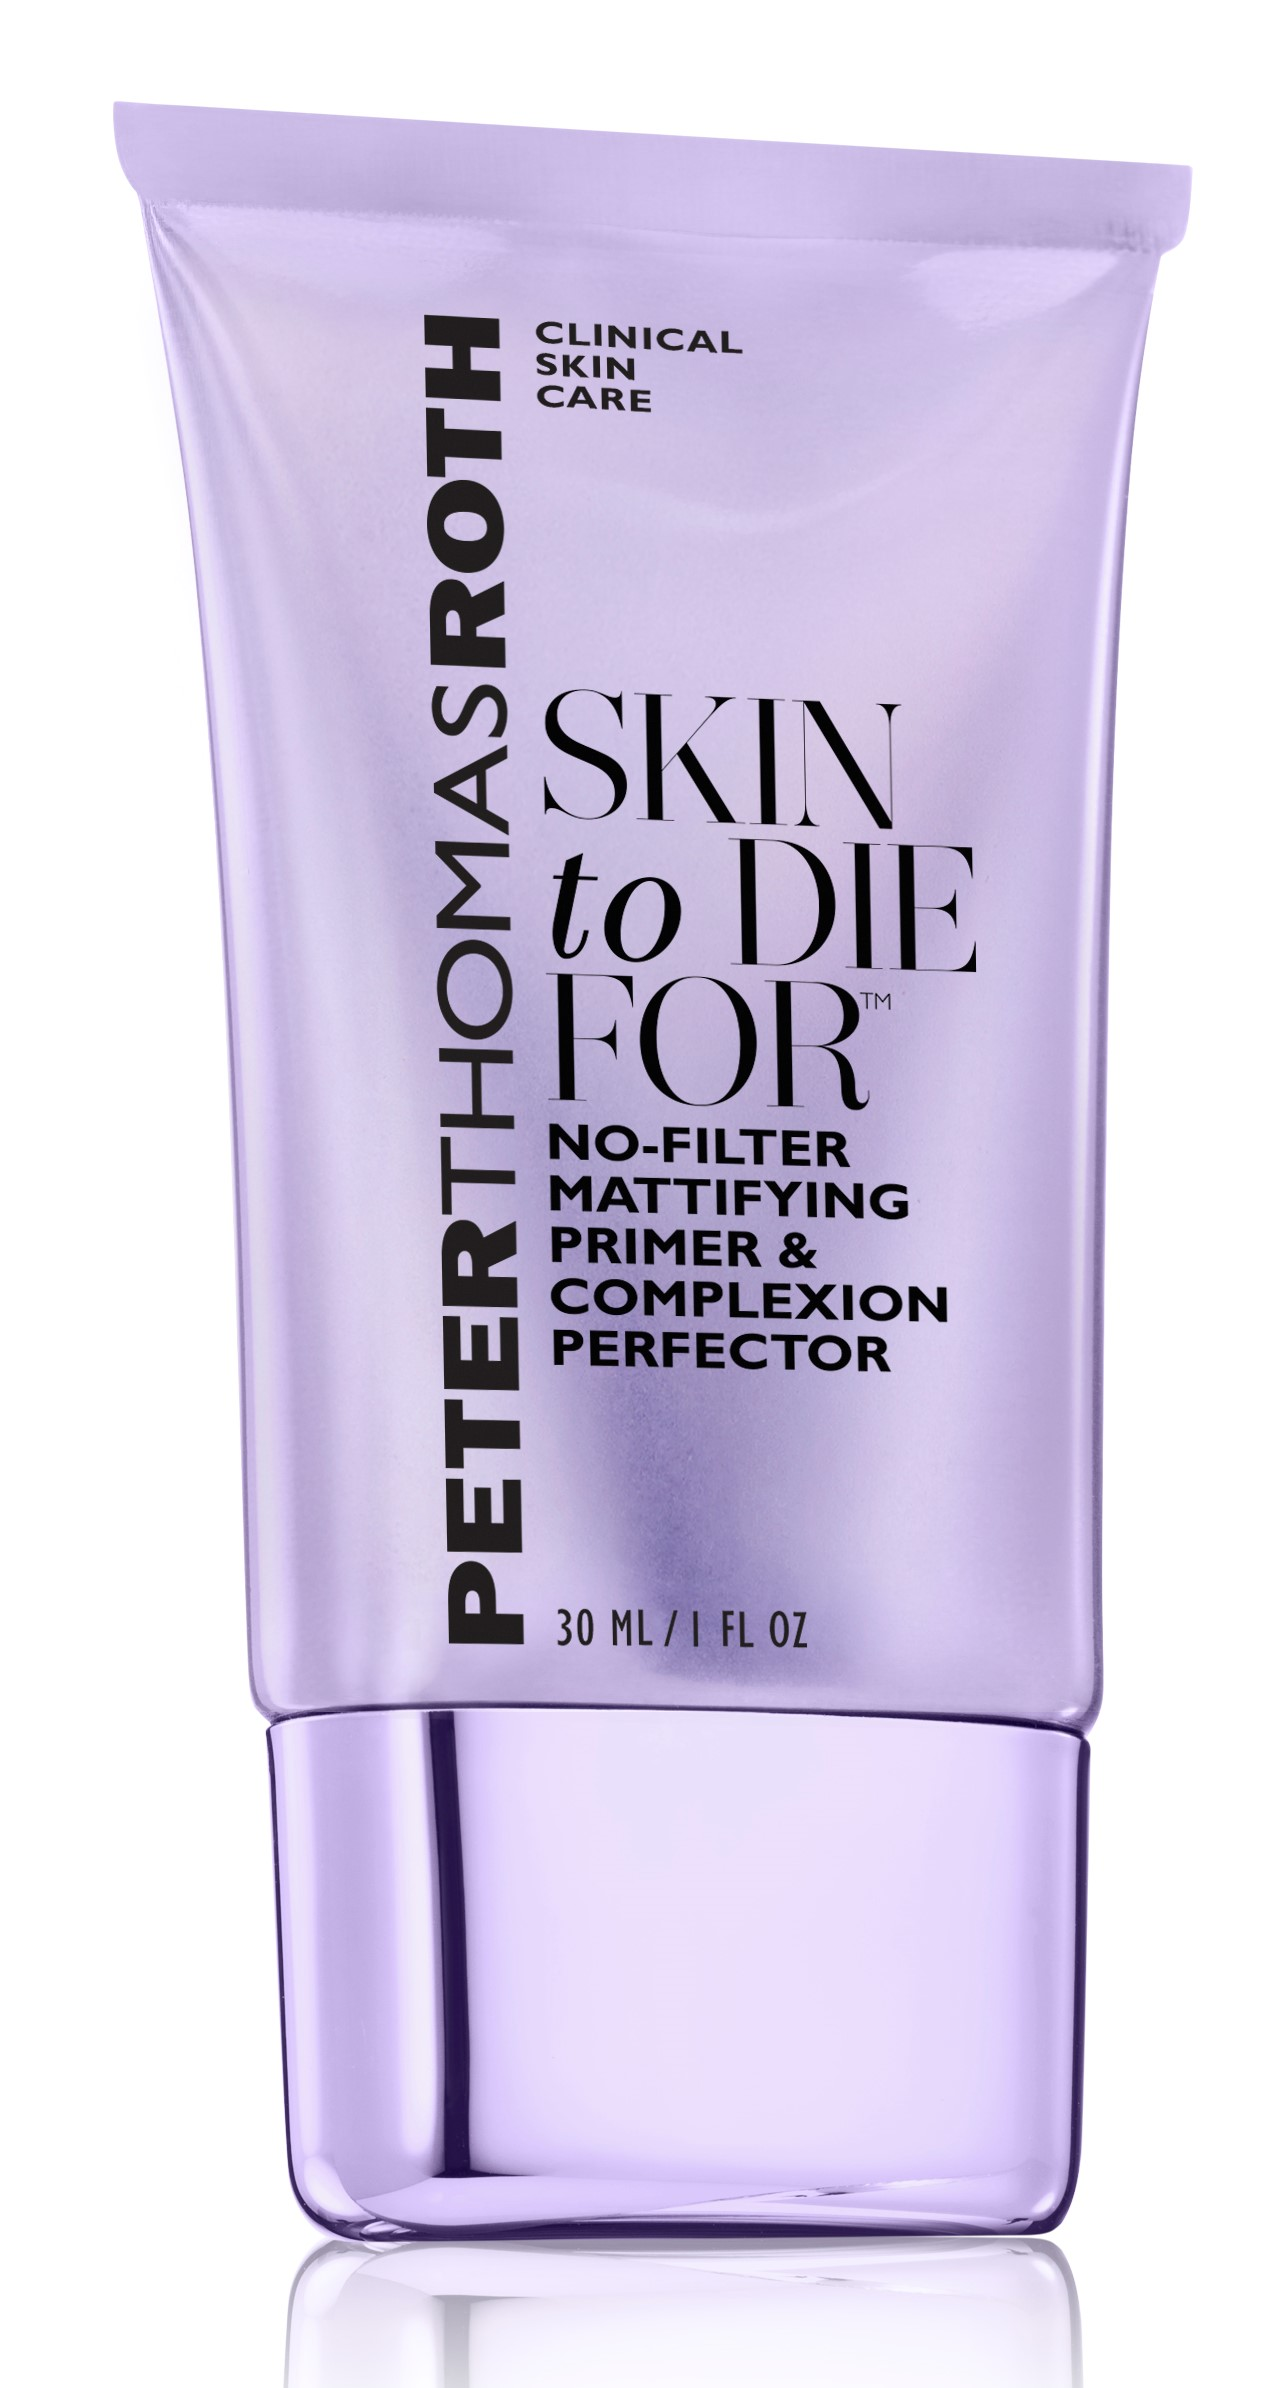 Billede af Peter Thomas Roth Skin To Die For Mattifying Primer & Complexion Perfector 30 ml.